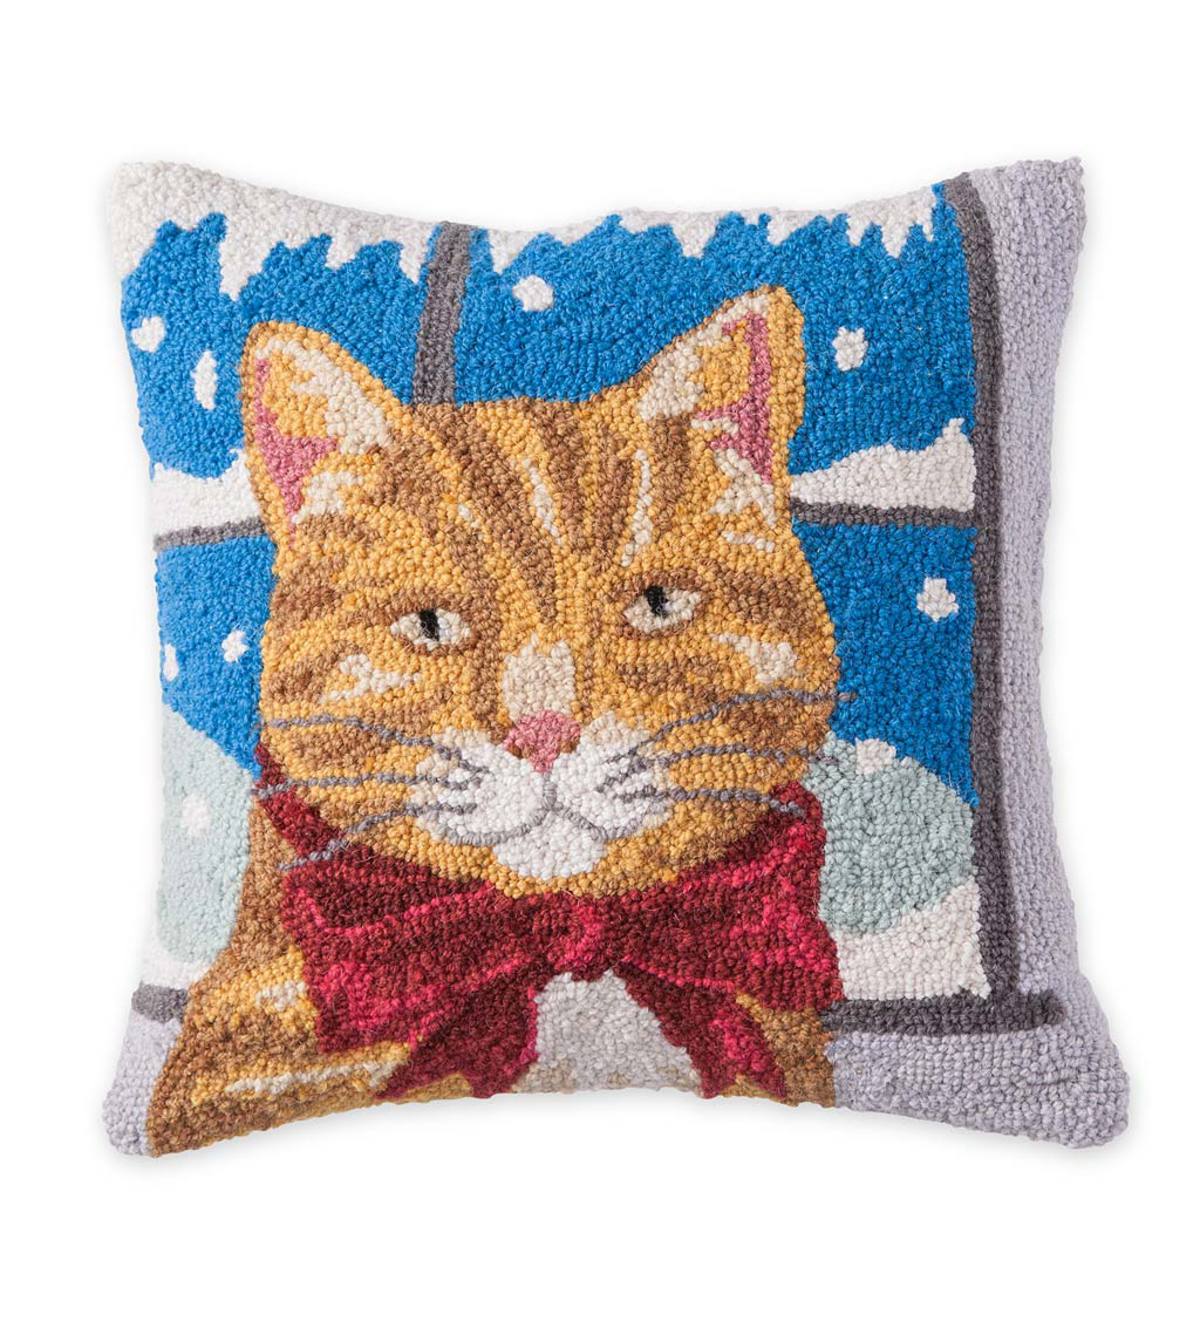 Hooked Wool Holiday Throw Pillow with Tabby Cat